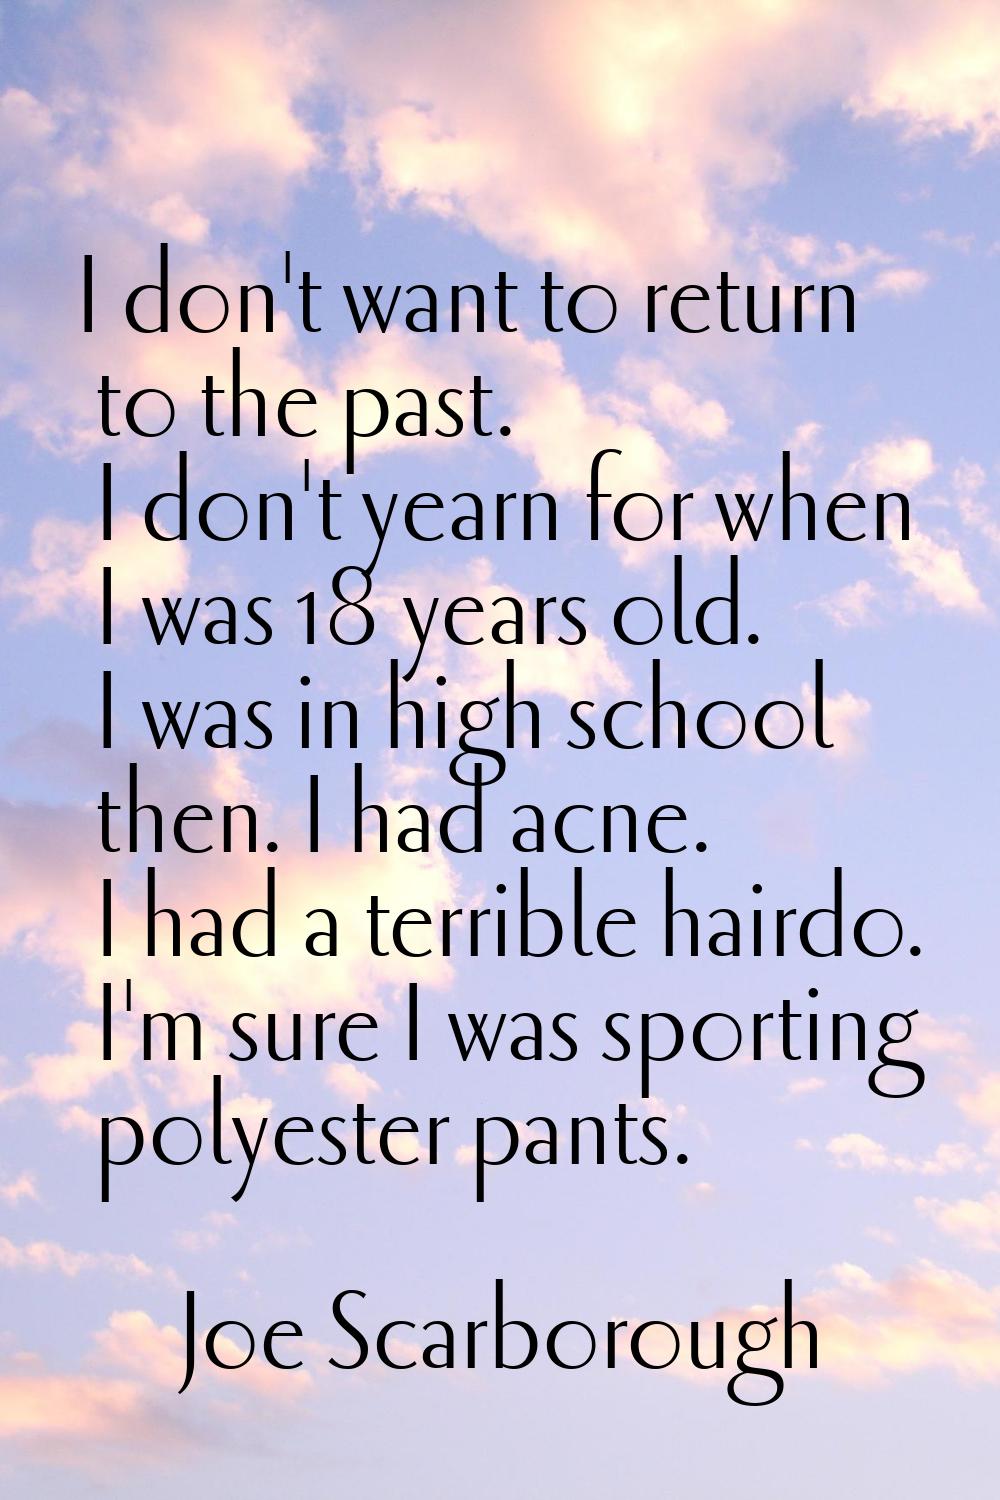 I don't want to return to the past. I don't yearn for when I was 18 years old. I was in high school